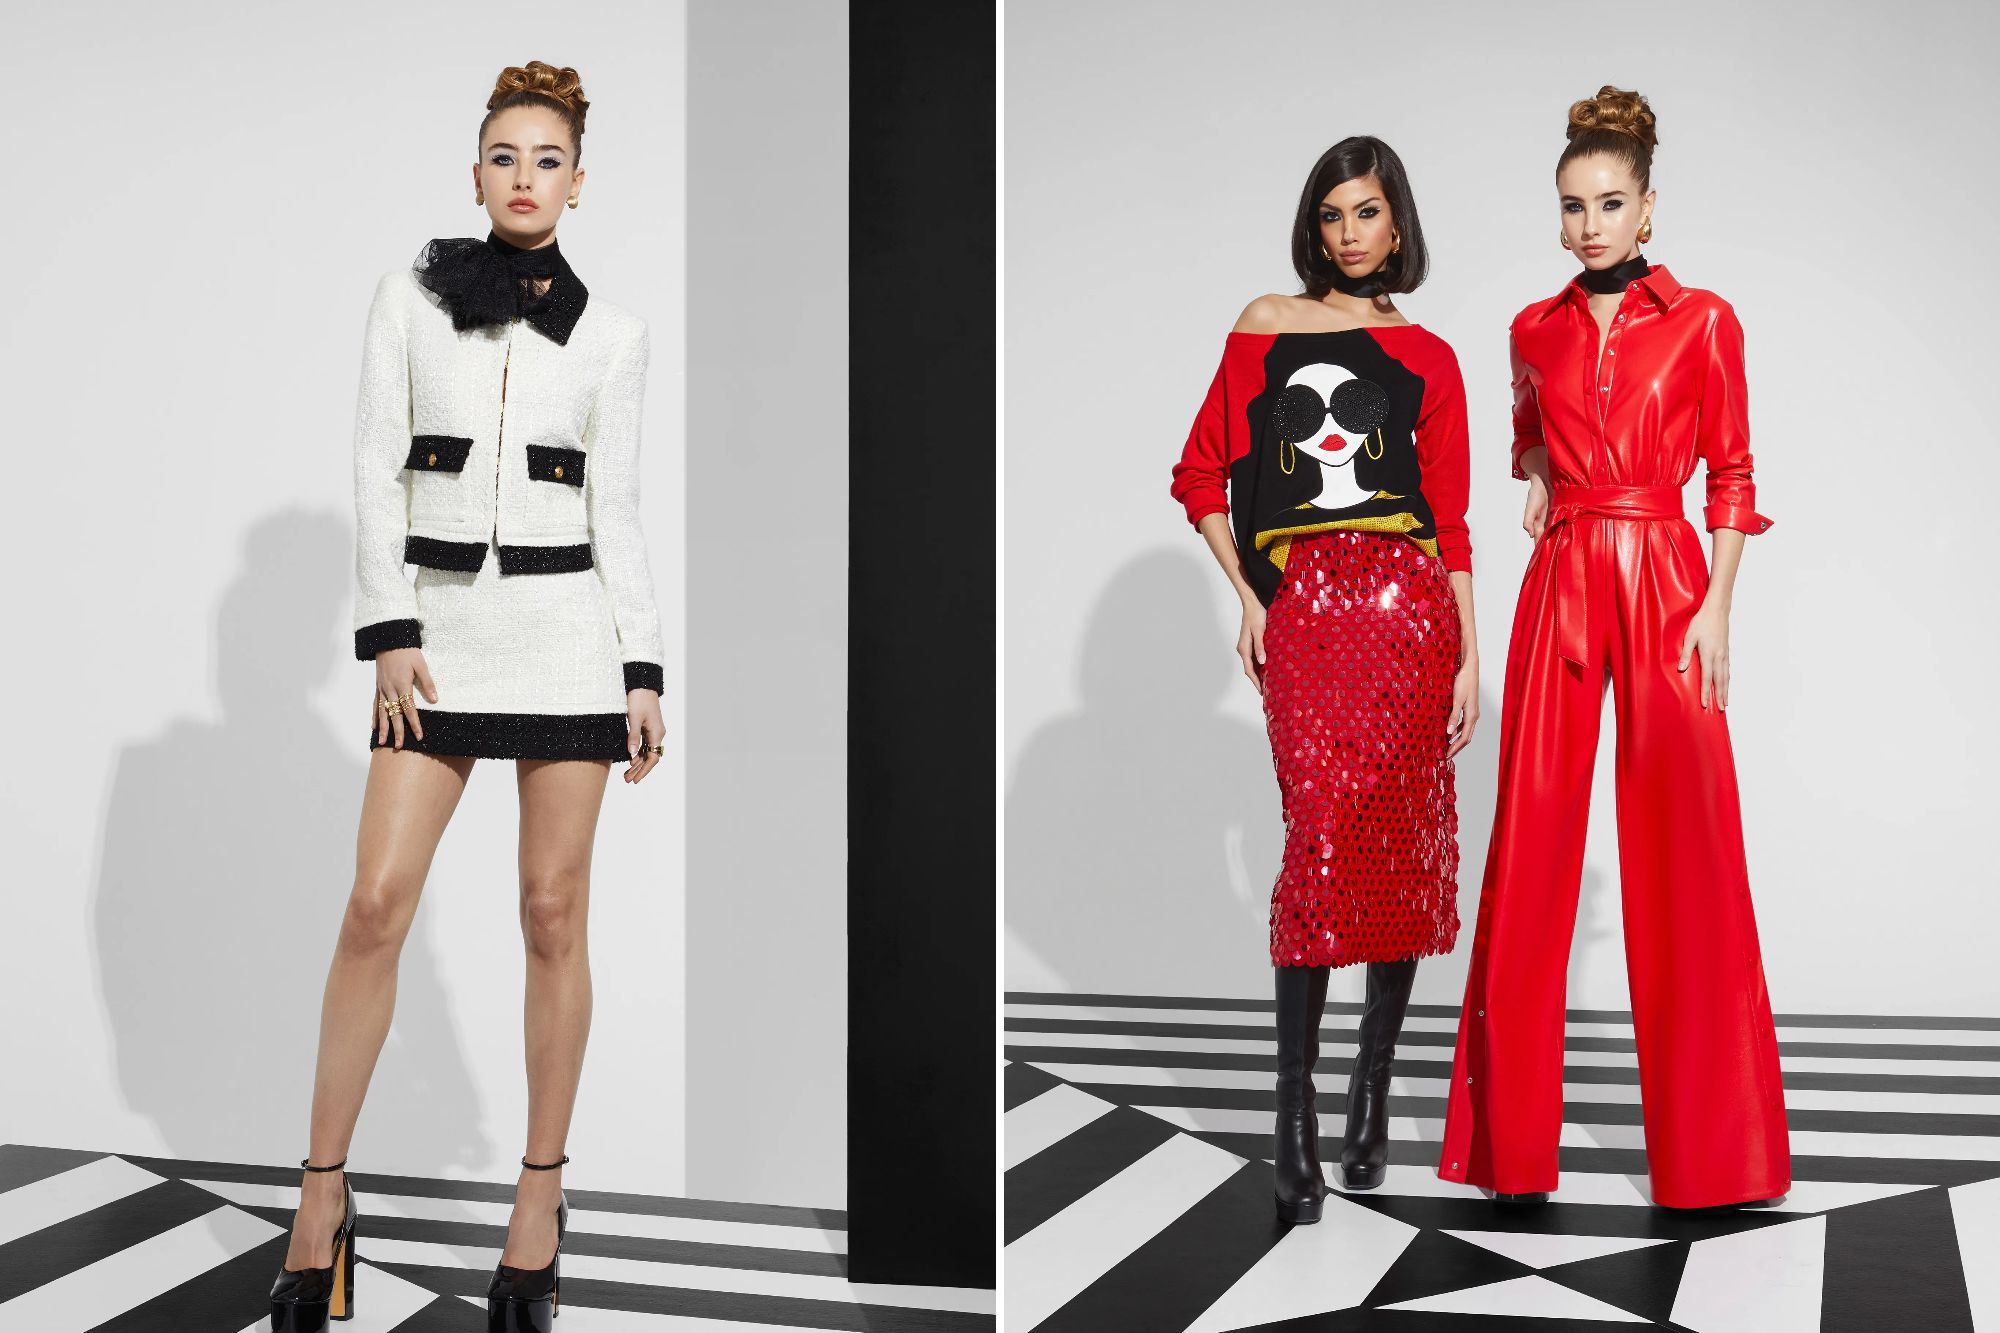 Outfits from Alice & Olivia feature white and red mod looks.